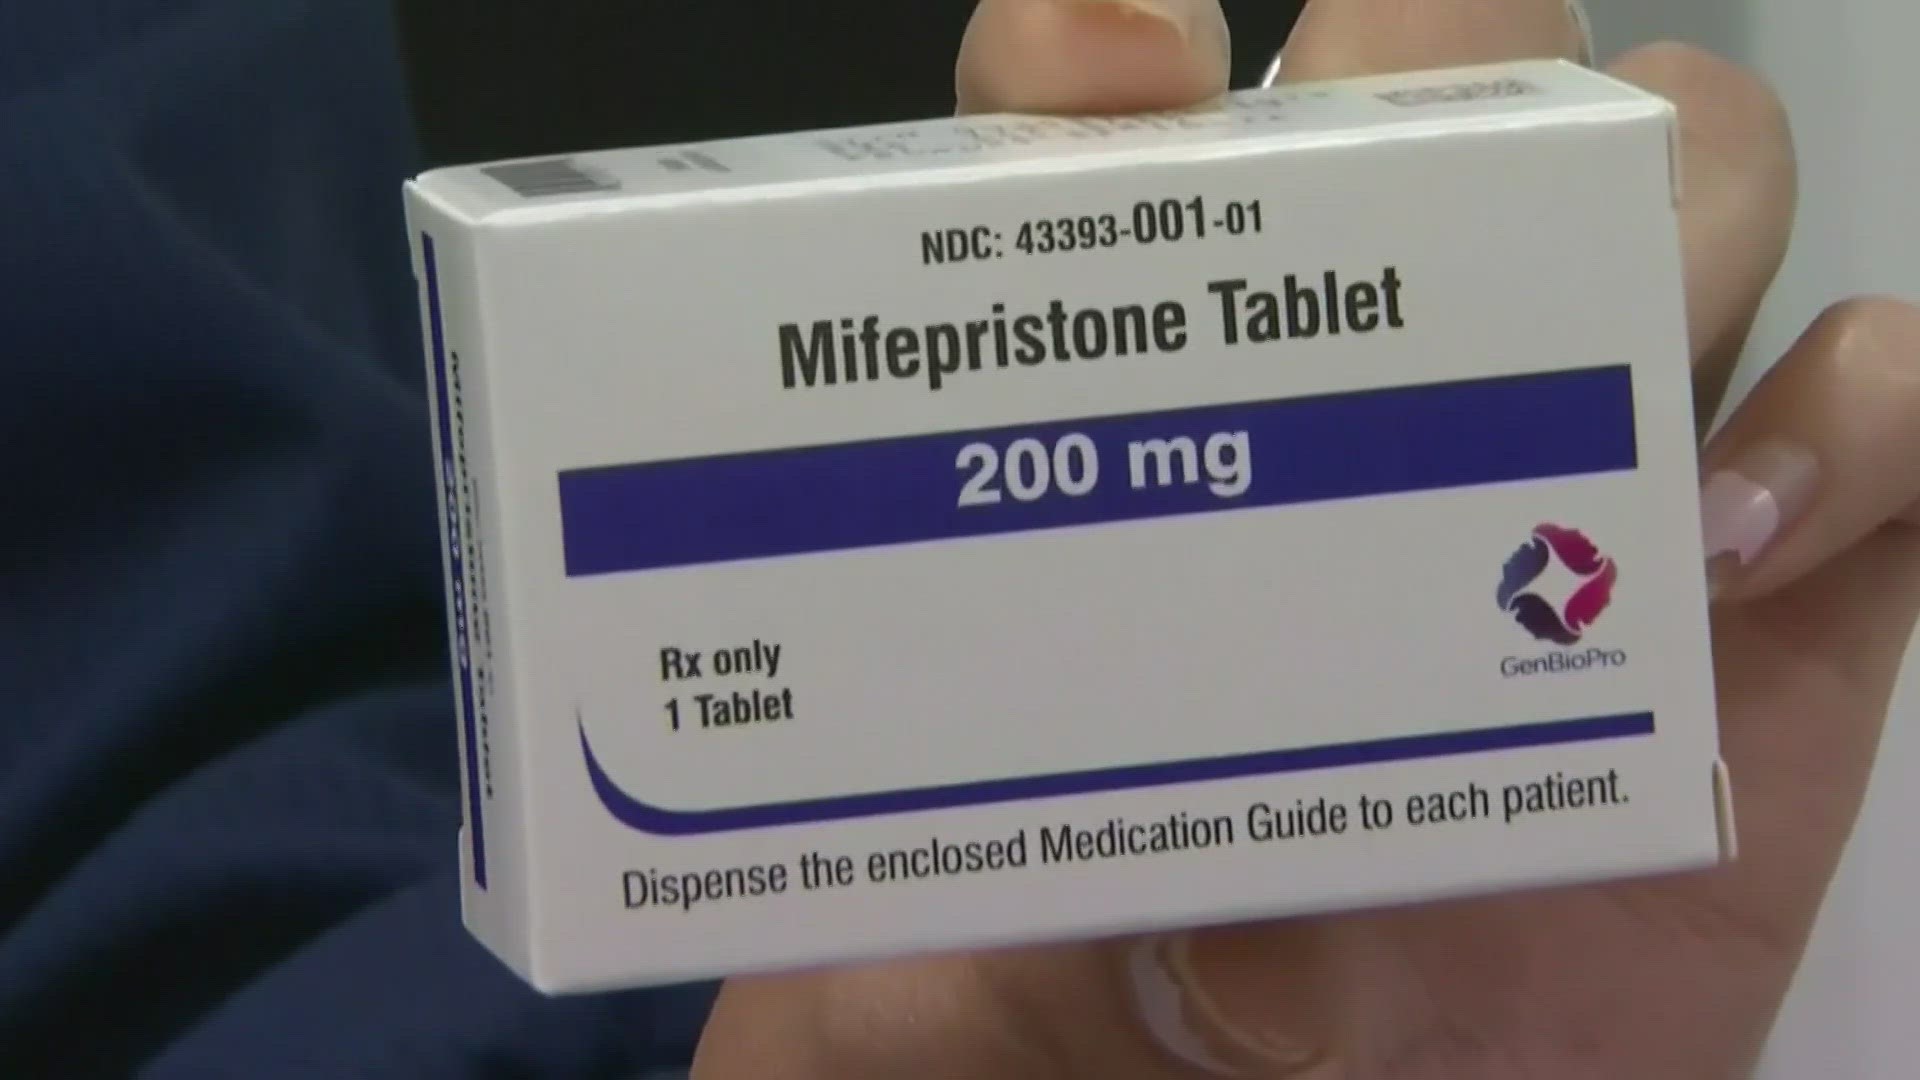 Conflicting court rulings put in doubt access to the abortion medication mifepristone. Health Expert Dr. Payal Kohli discusses implications of restricting the drug.